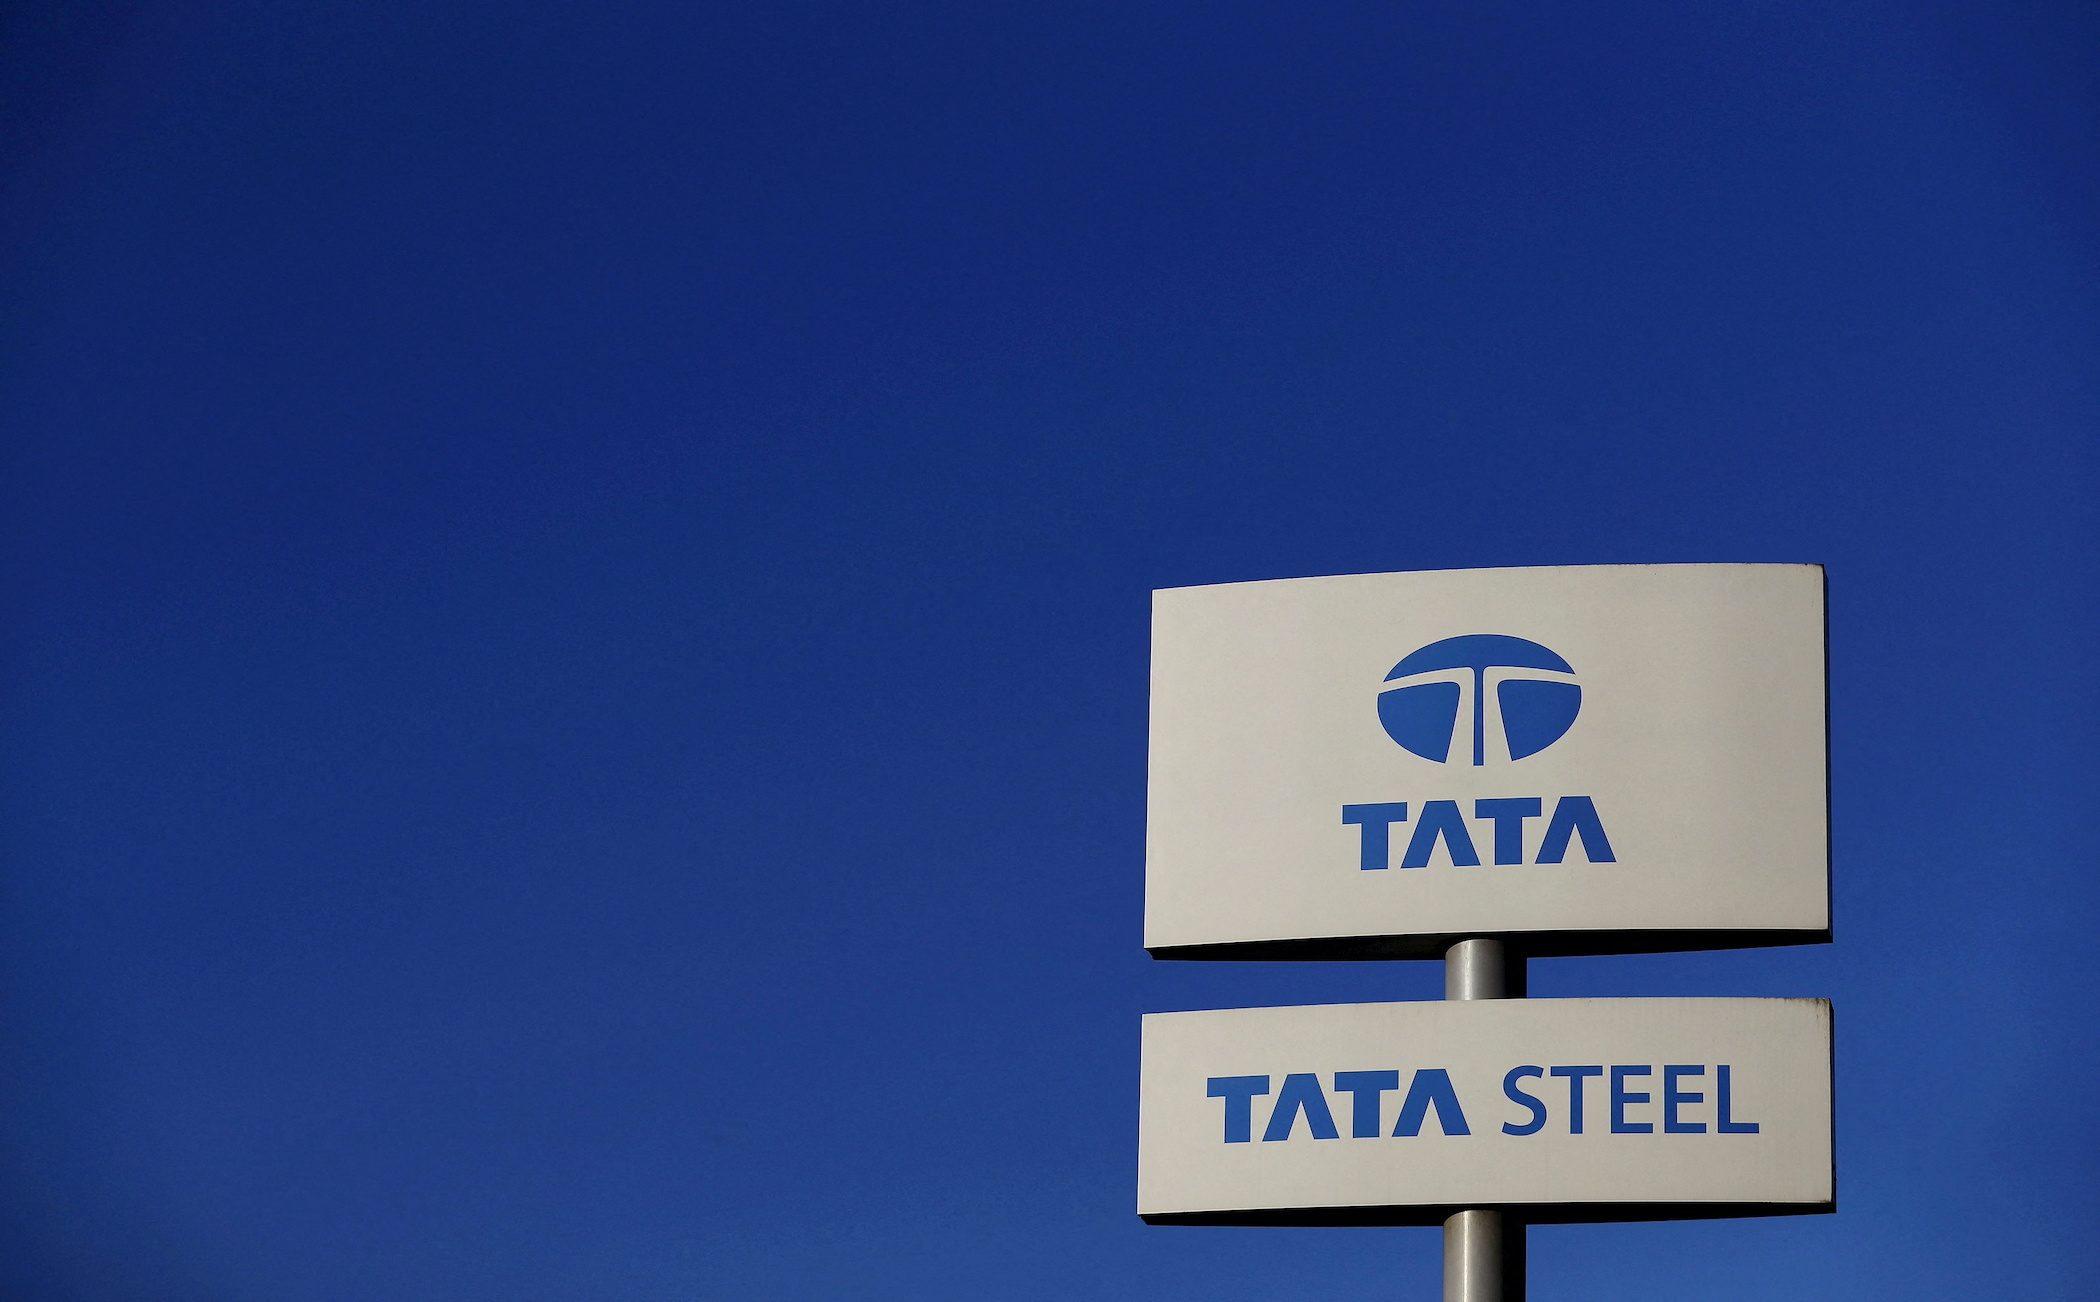 India’s Tata Steel buys coal from Russia weeks after vowing to cut ties